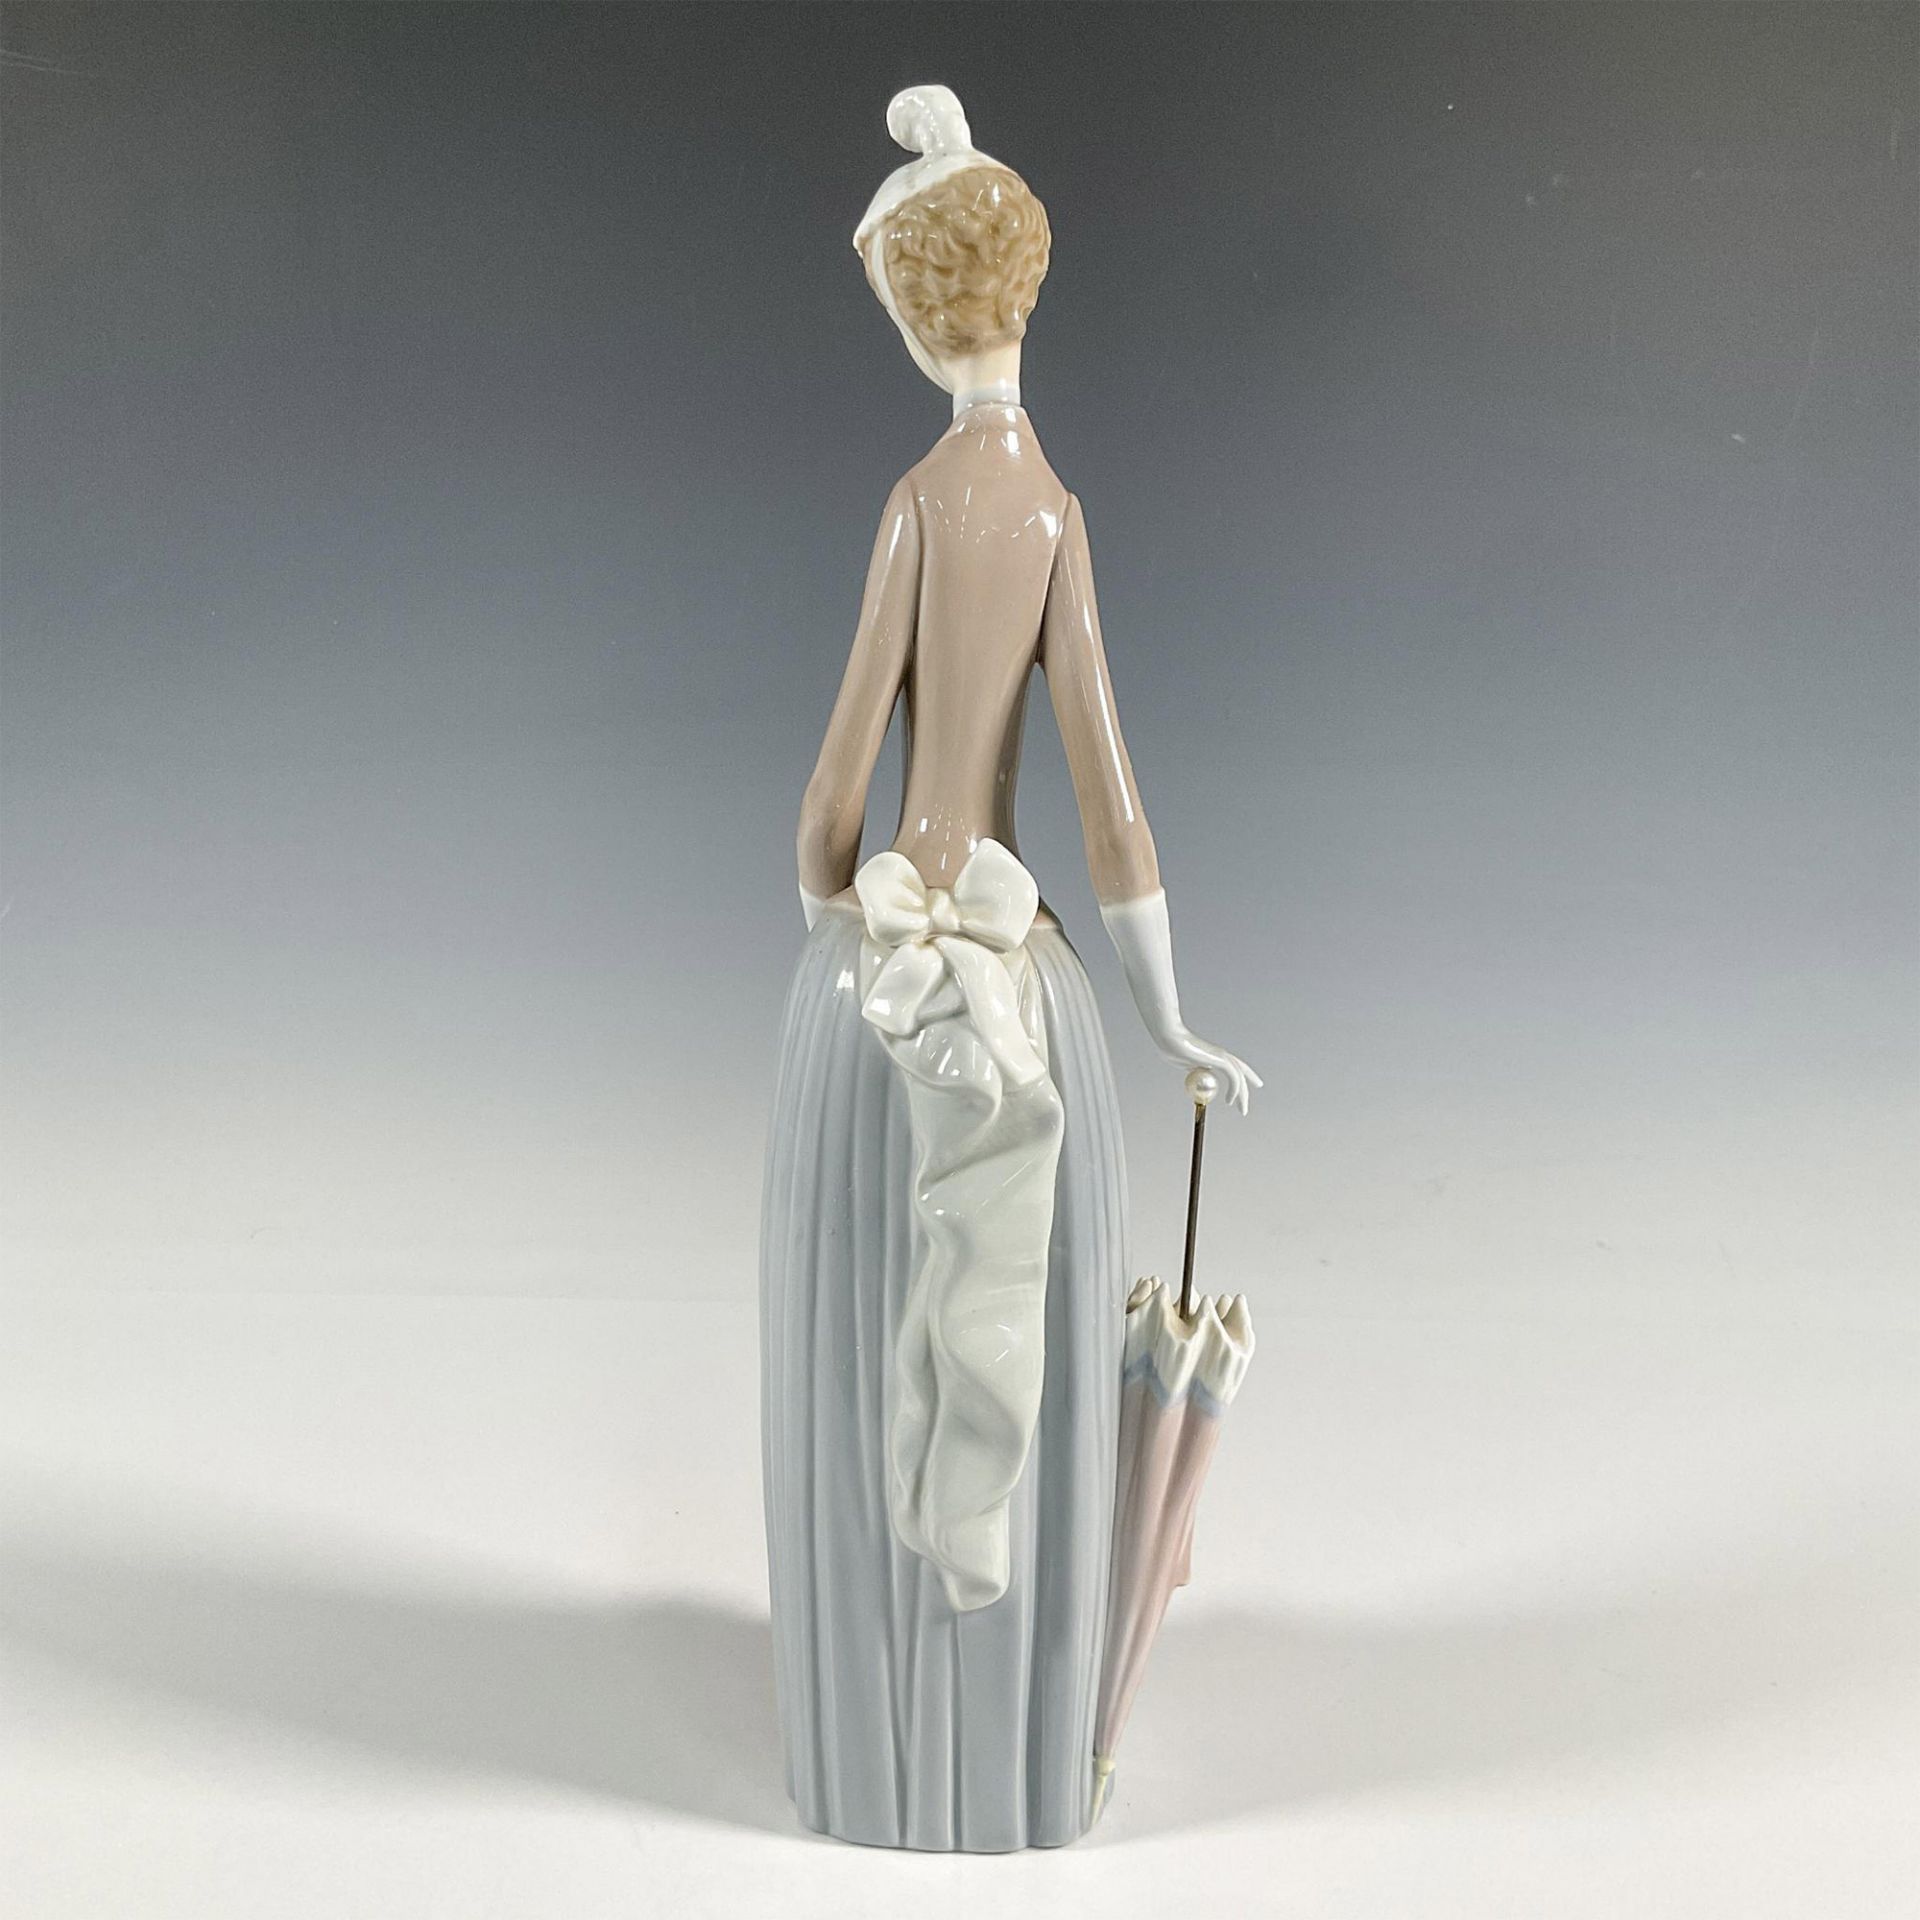 Woman with Dog 1004761 - Lladro Porcelain Figurine - Image 2 of 3